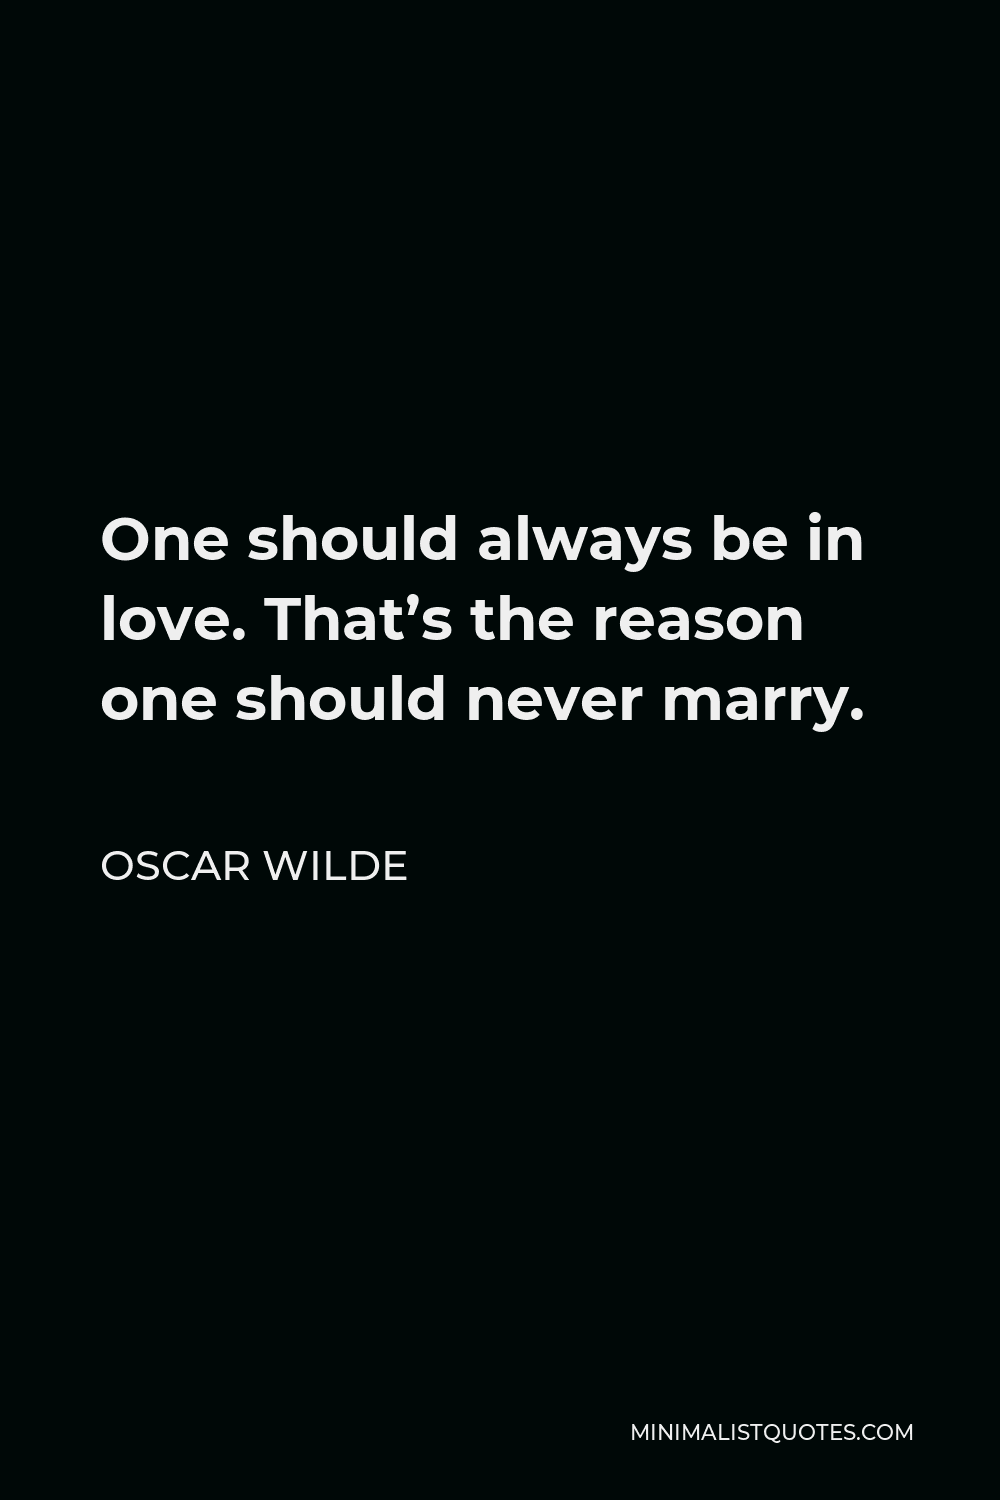 Oscar Wilde Quote - One should always be in love. That’s the reason one should never marry.